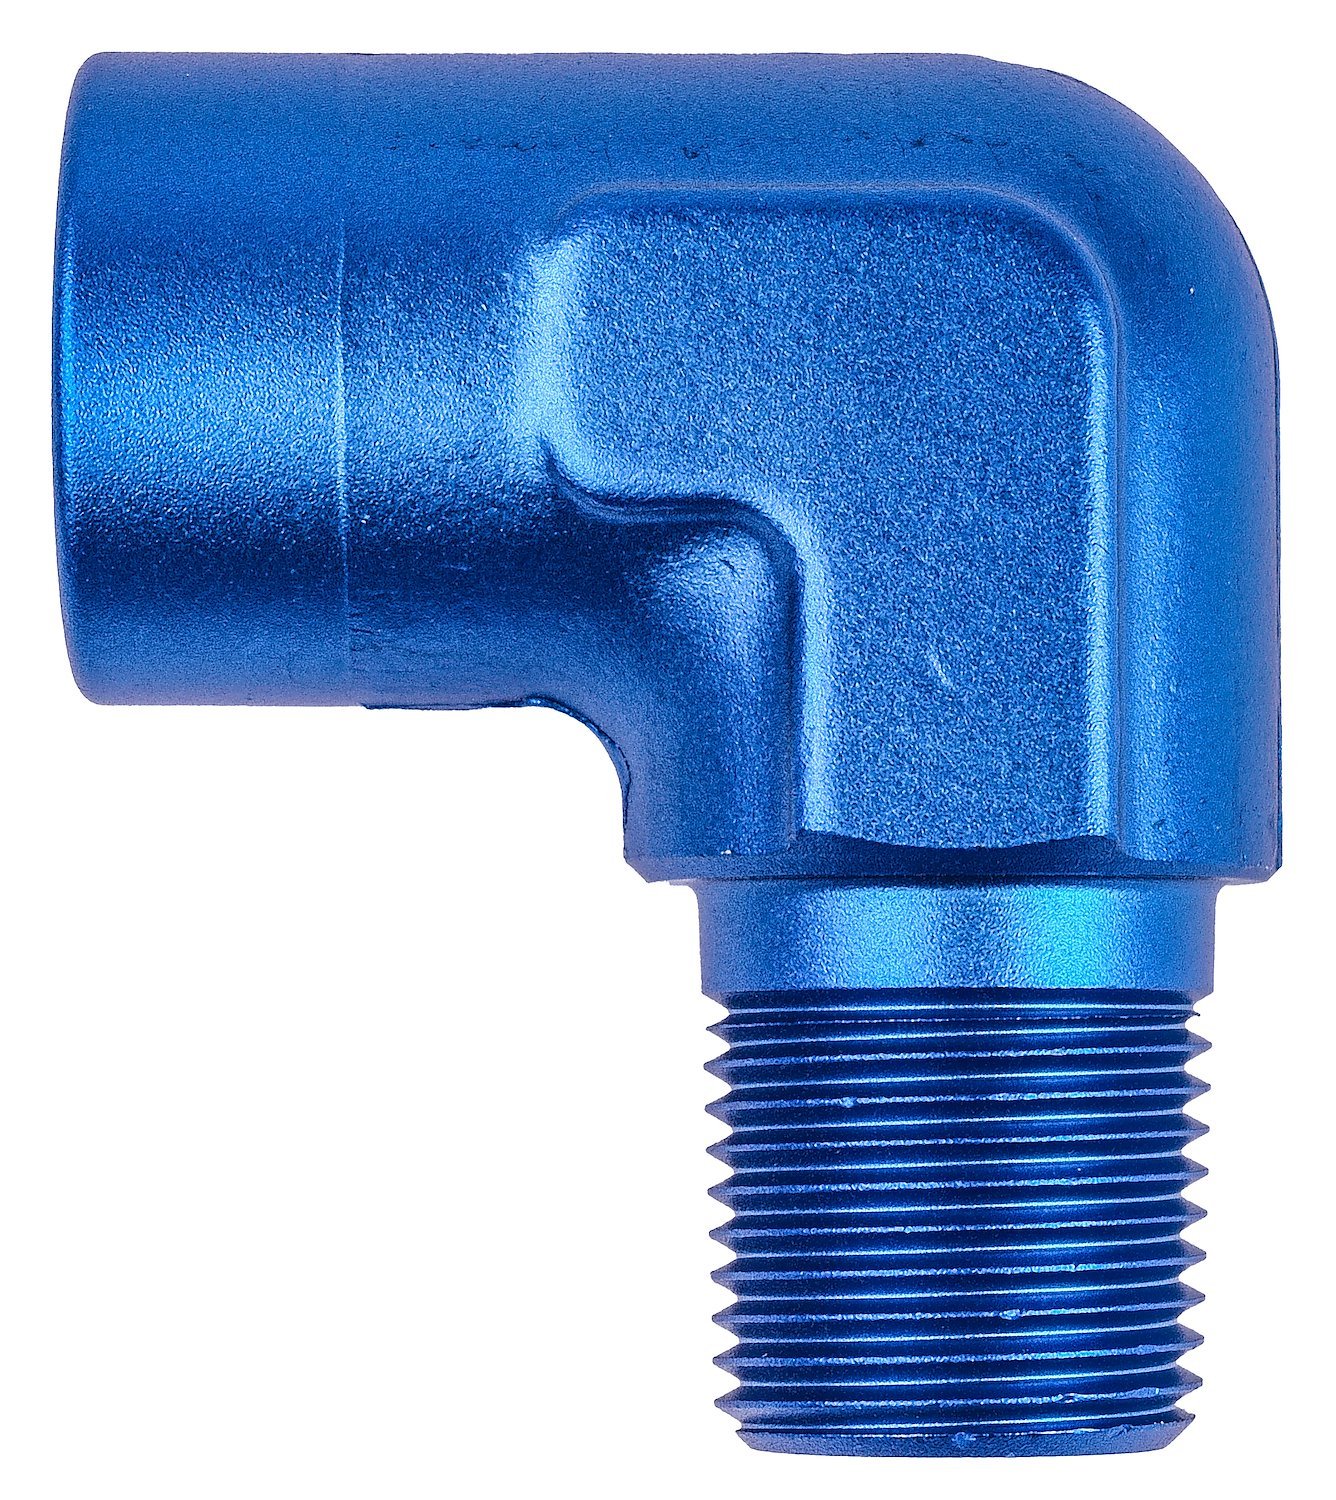 NPT to NPT Adapter Fitting, 90 degree [3/8 in. NPT Male to 3/8 in. NPT Female, Blue]